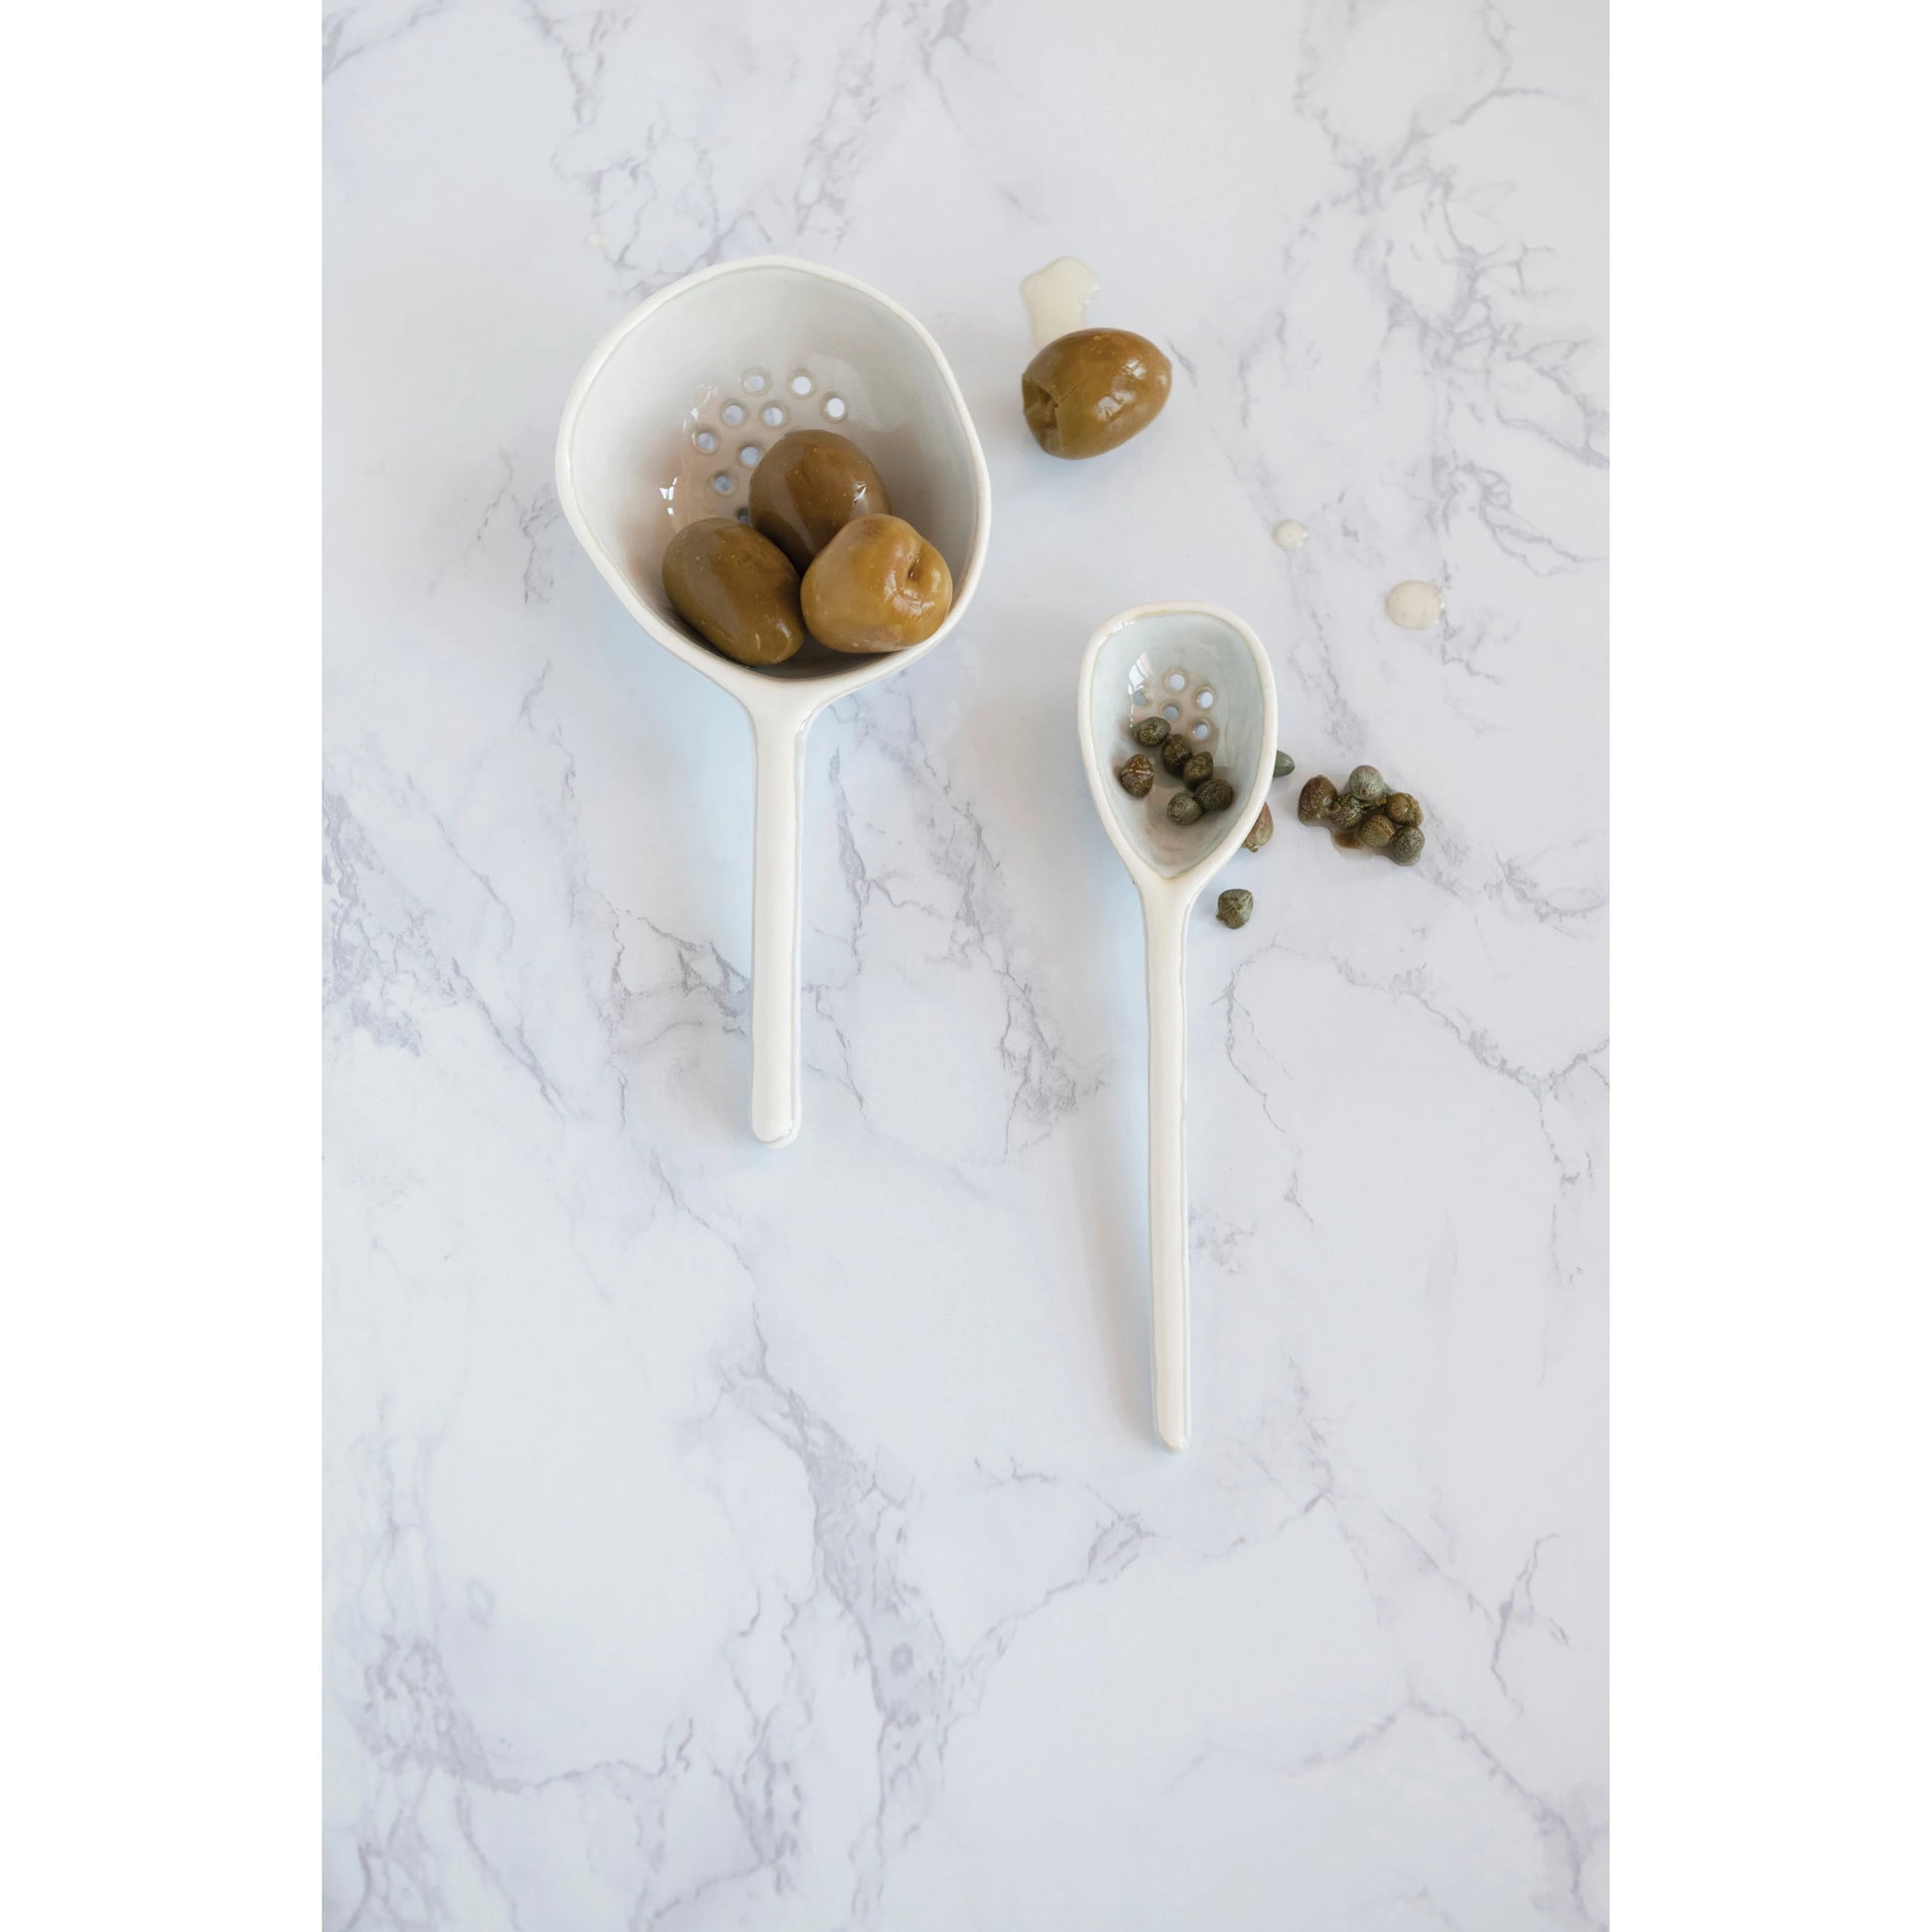 white ceramic straining spoons filled with olives and capers on a grey marble background.